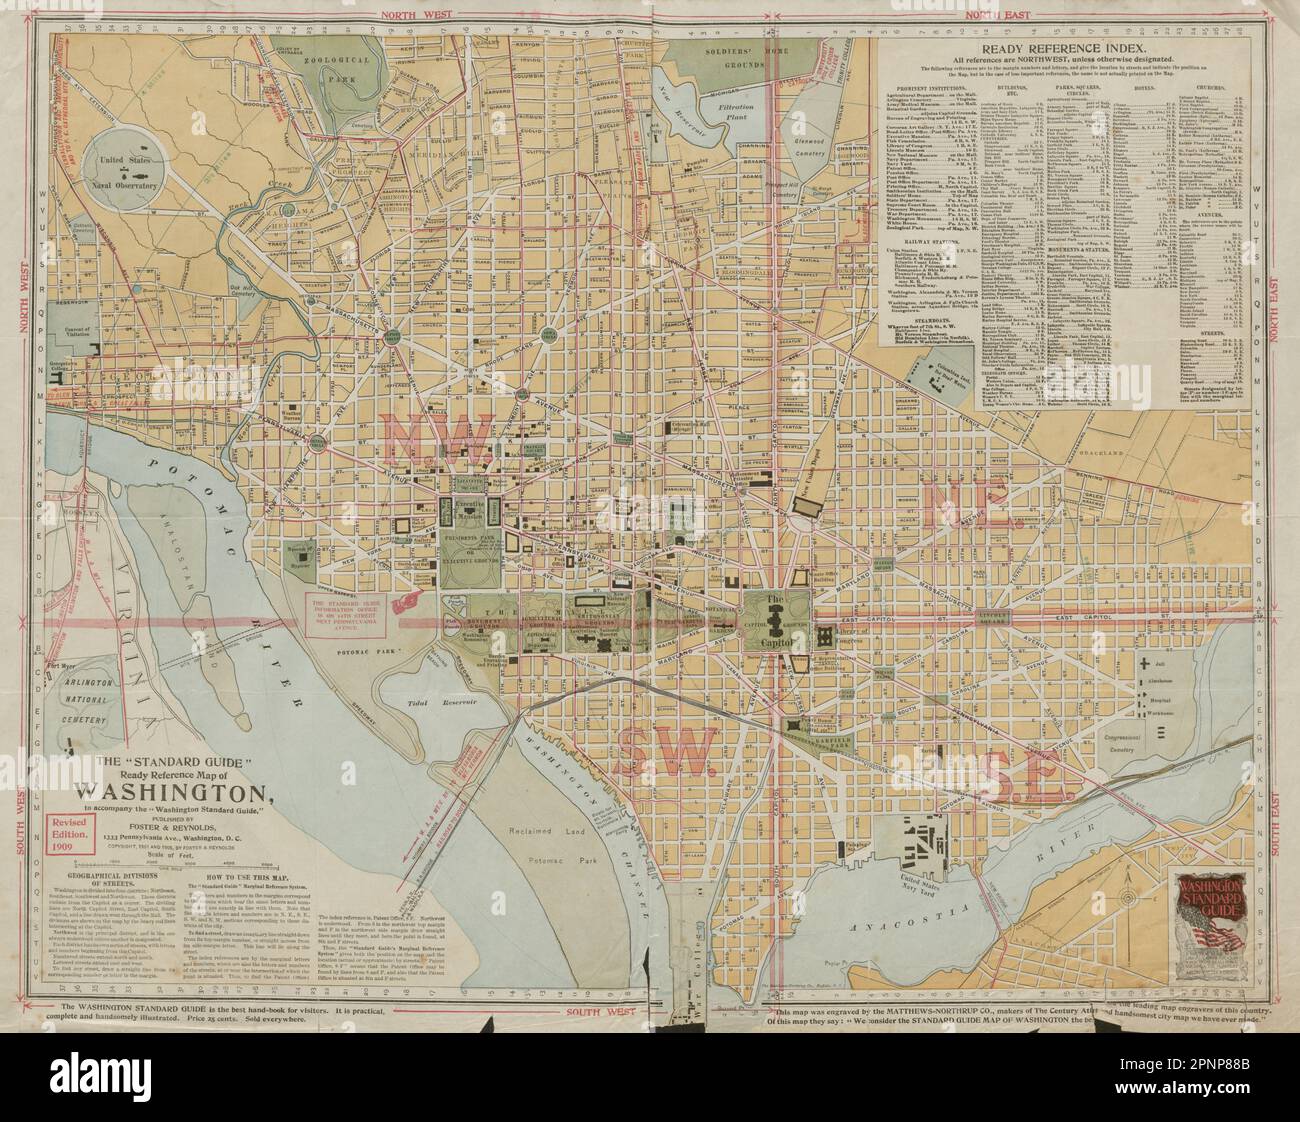 The 'Standard Guide' Ready Reference Map of Washington DC 1909 old antique Stock Photo